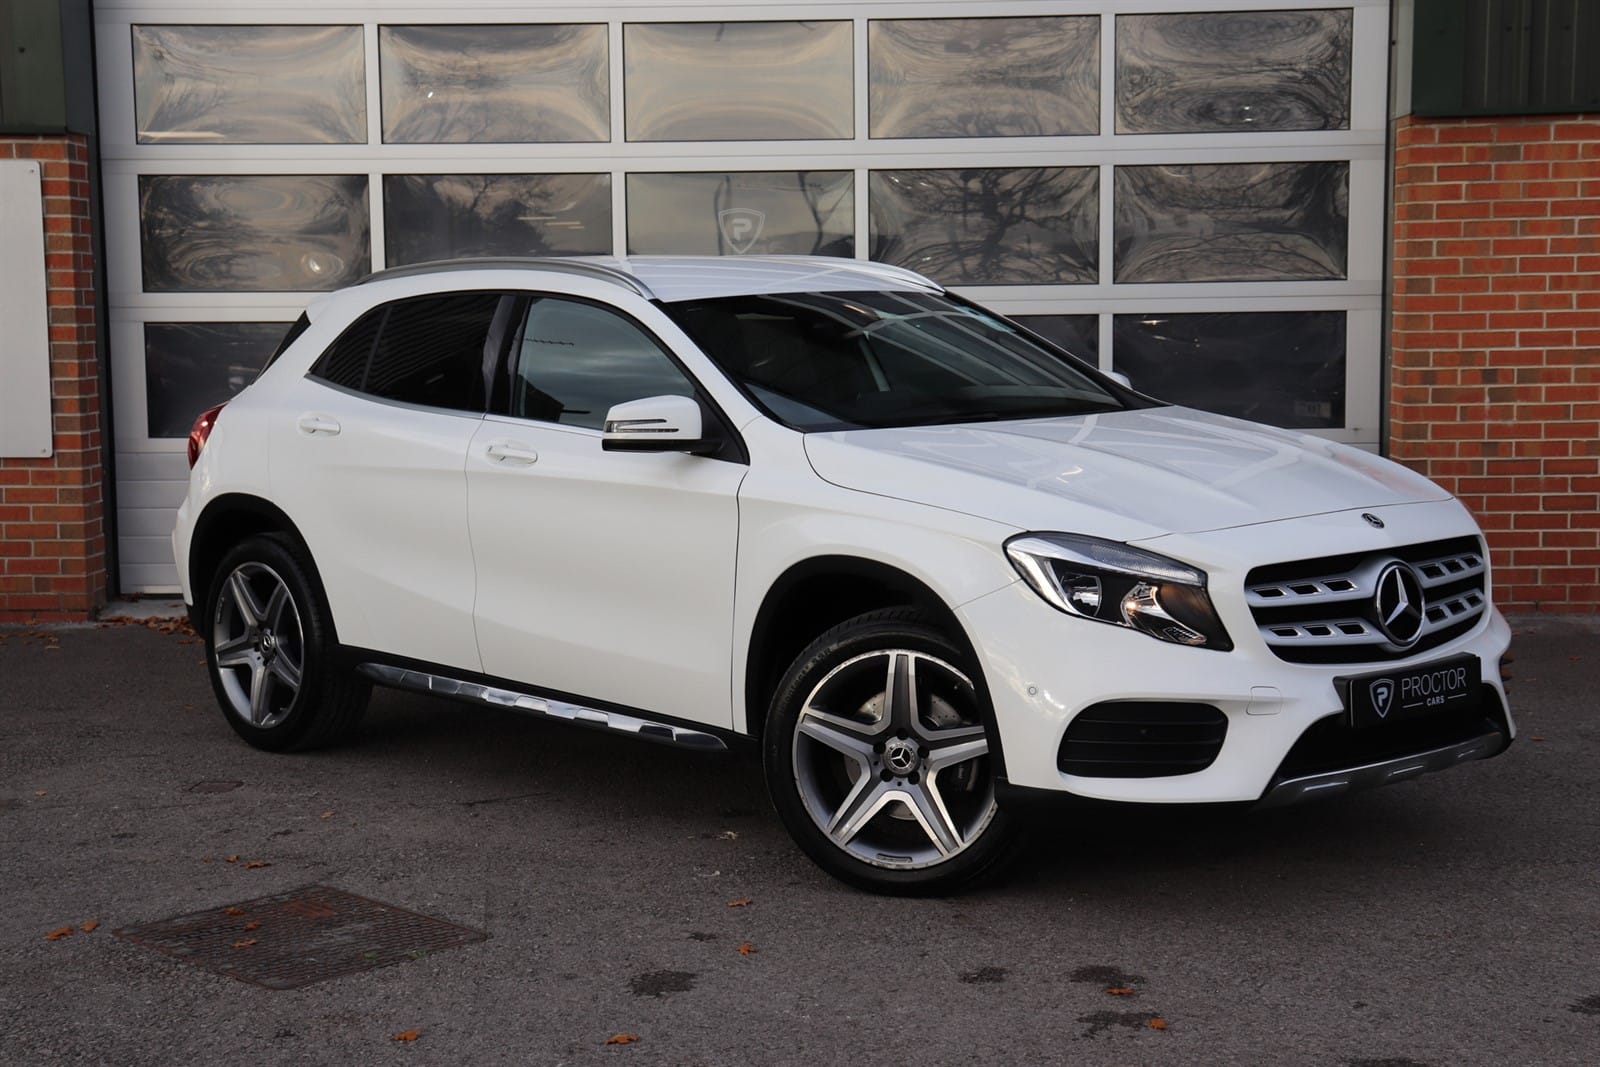 Used Mercedes-Benz GLA220 from Proctor Cars